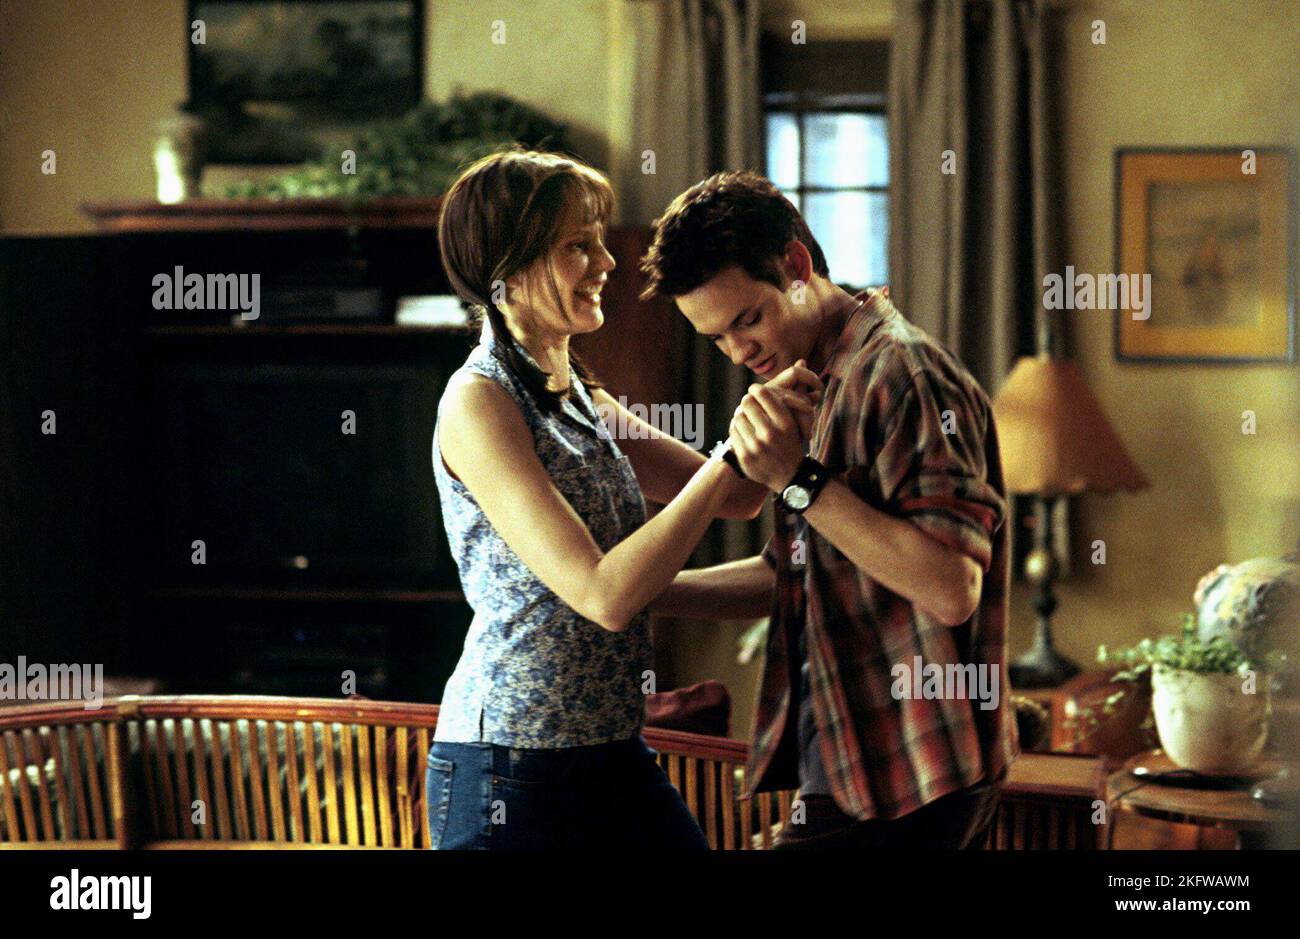 DARYL HANNAH, SHANE WEST, A WALK TO REMEMBER, 2002 Stock Photo